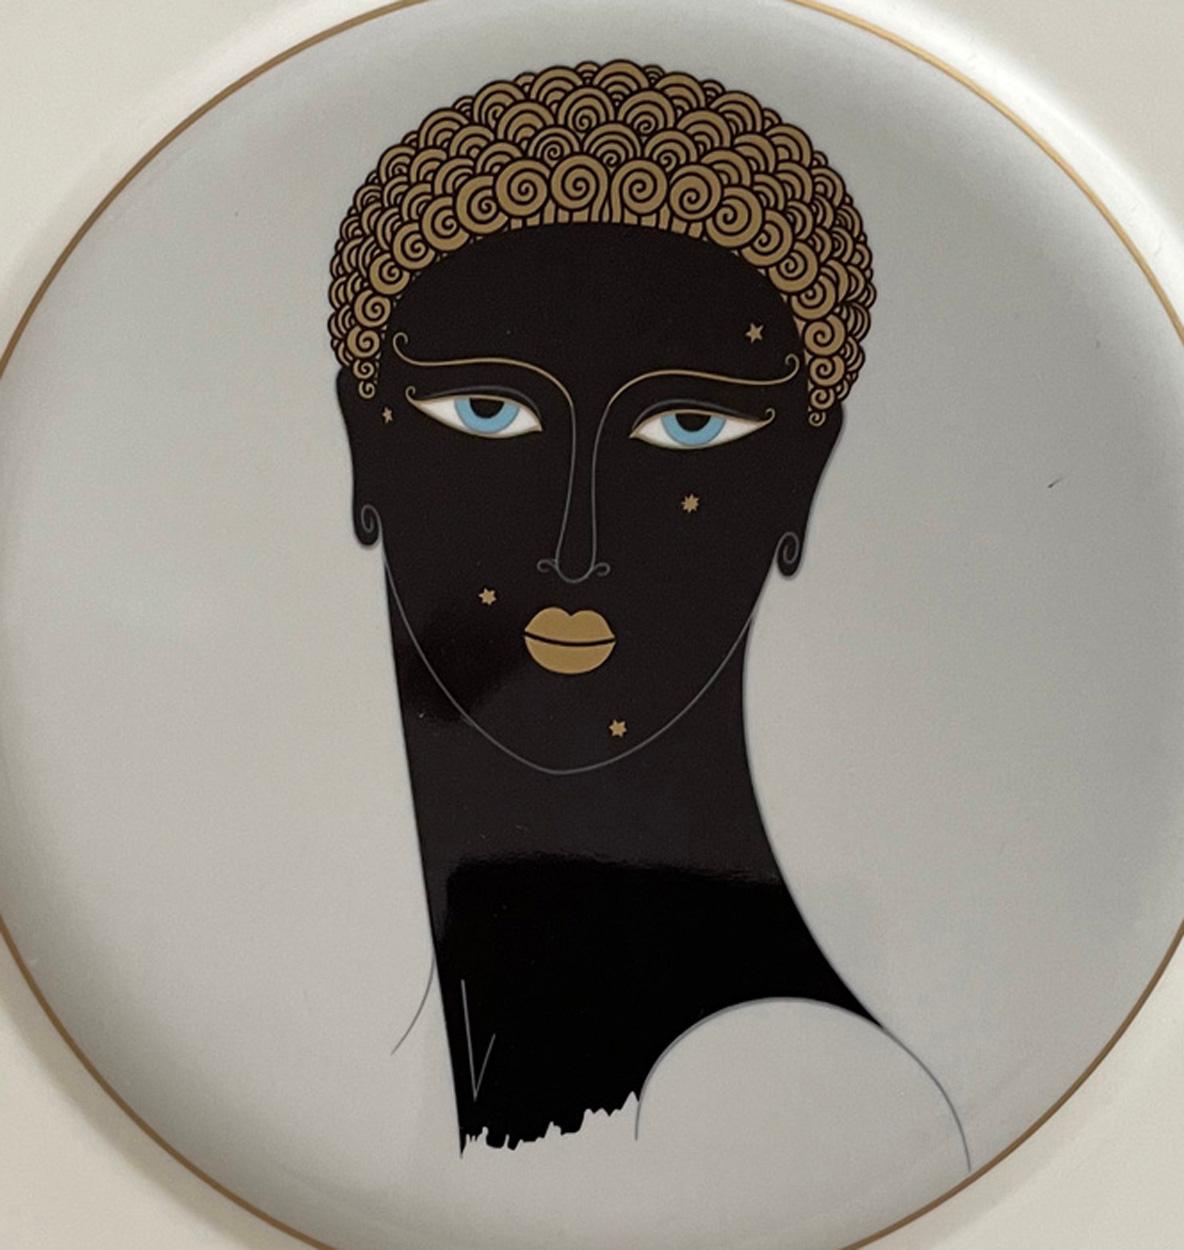 Queen Of Sheba Plate is an original decorative plate realized by Erté (after) in 1987. 

The plate in Bone China. 

Marked with a stylized Erte sign on the back side. Numbered on the back with the series number A 3253 and date of 1987. 

Romain de